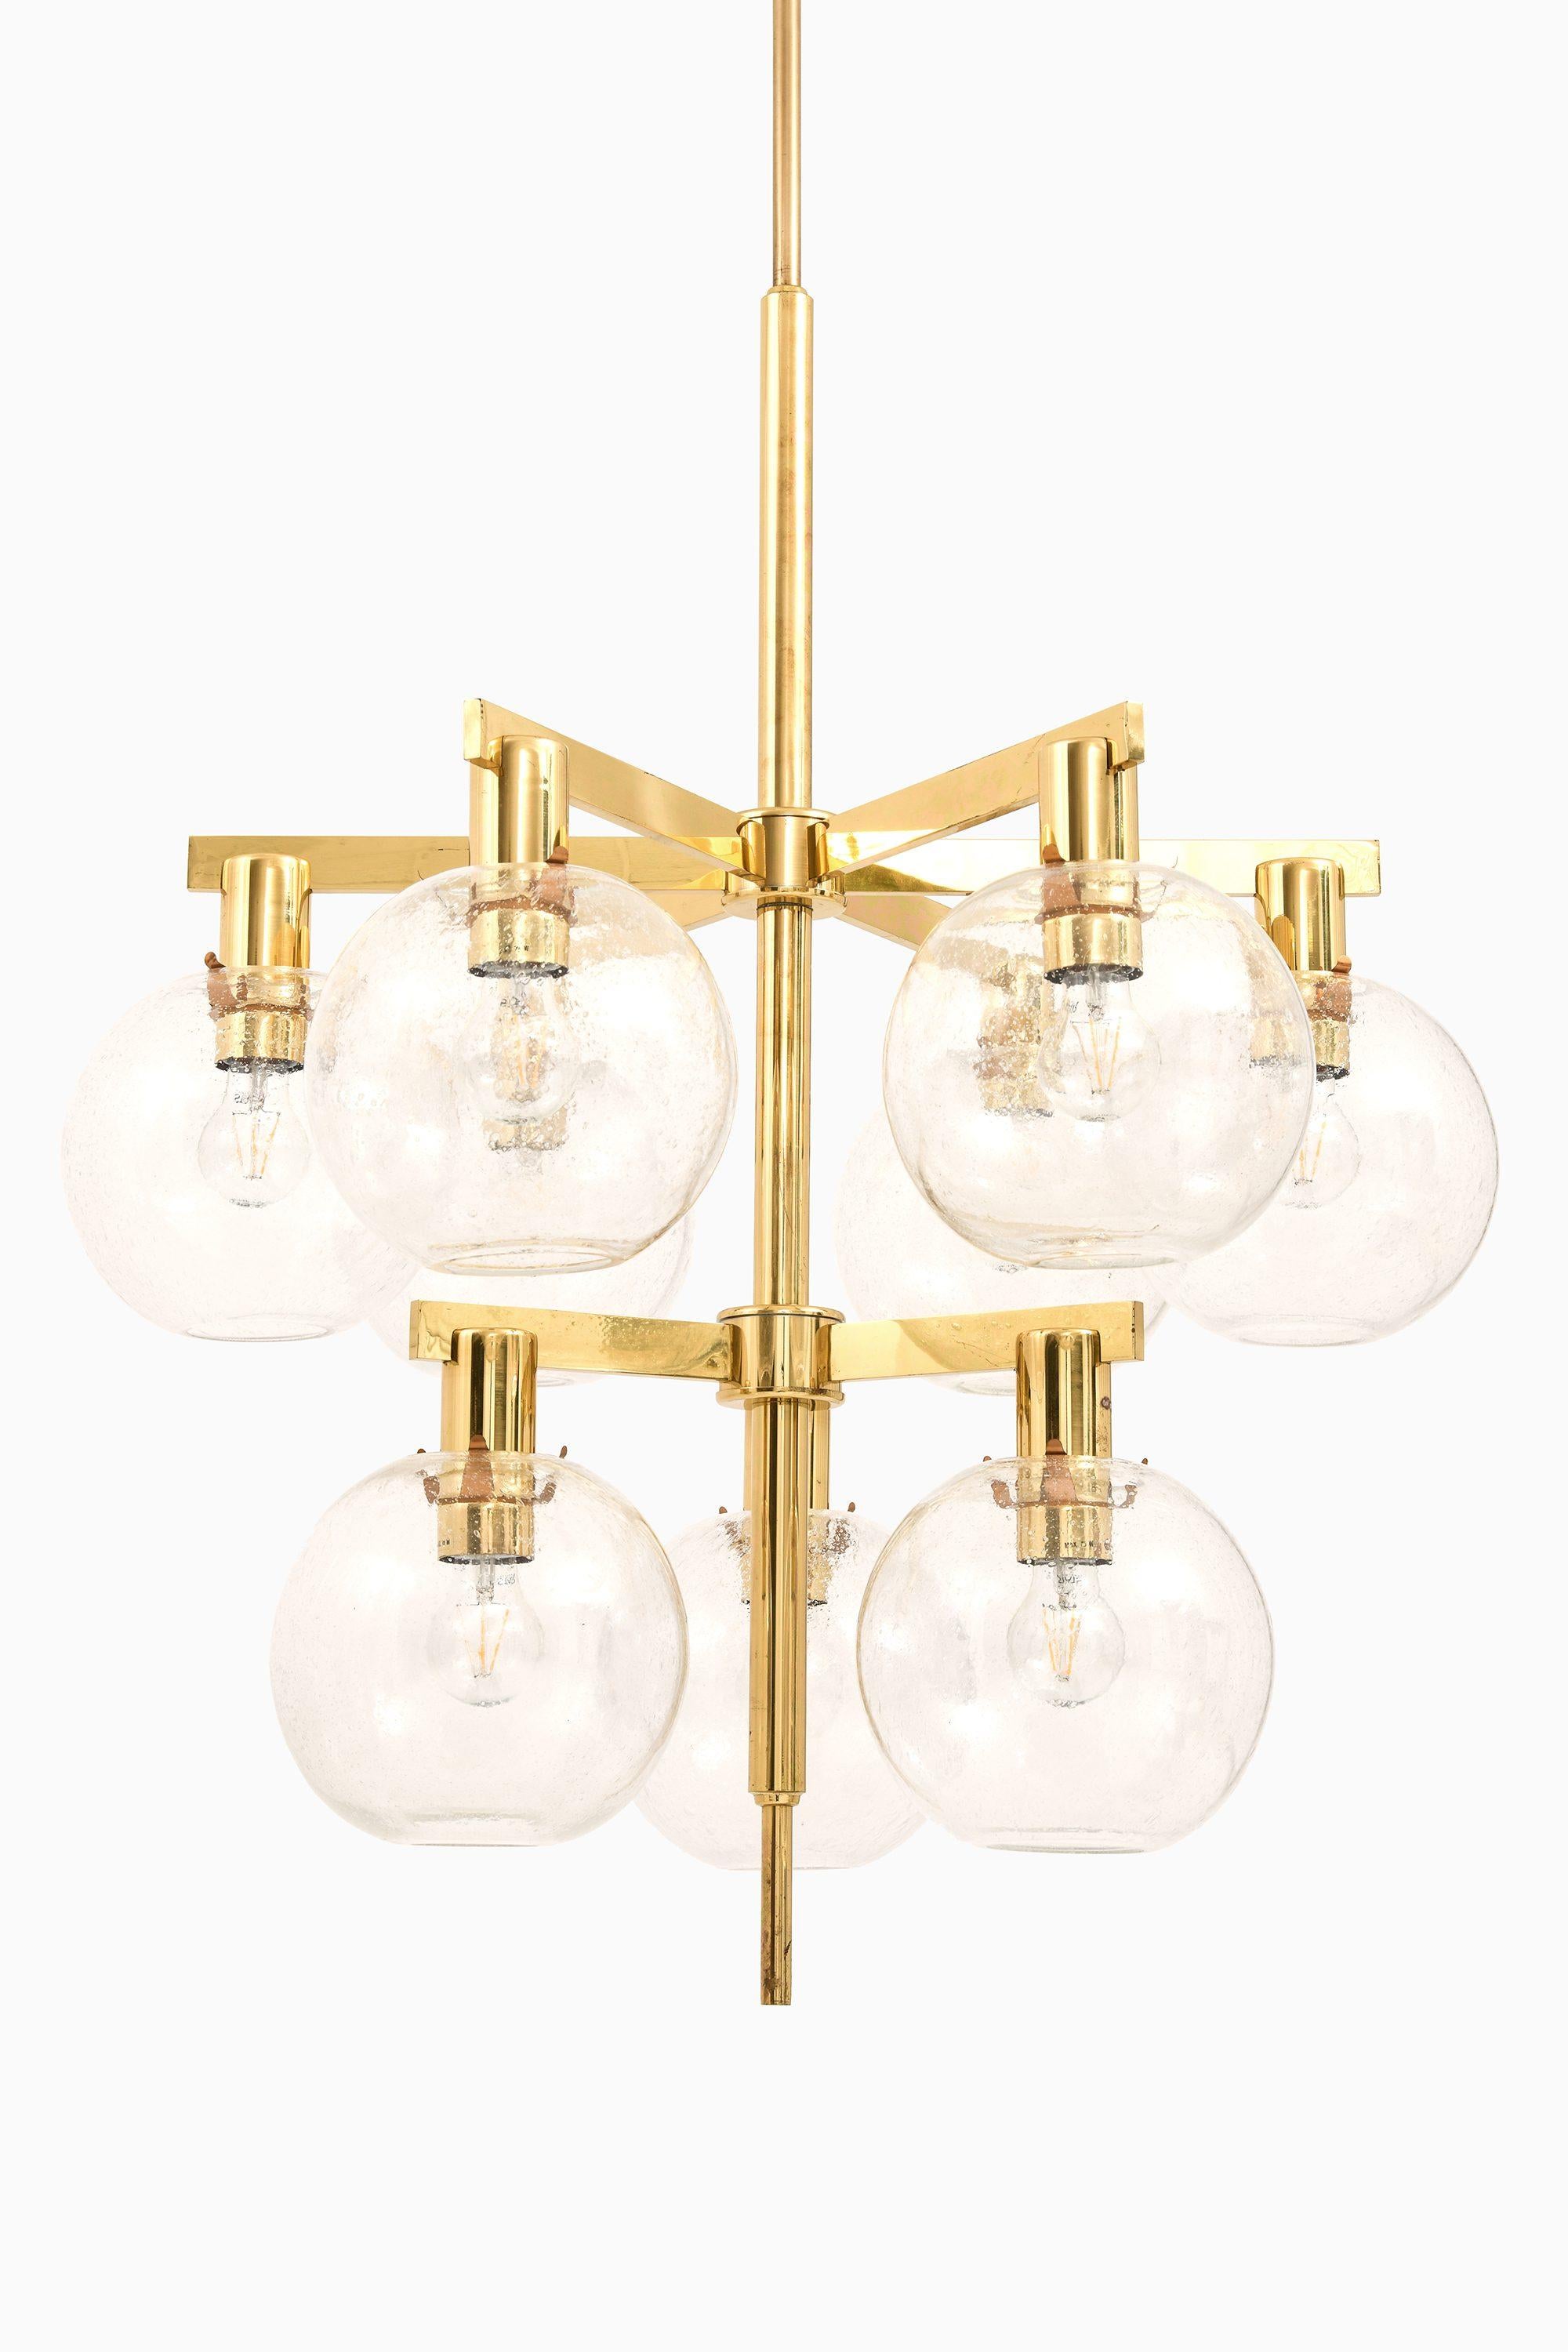 Large Ceiling Lamp / Chandelier in Brass and Glass by Hans-Agne Jakobsson, 1950's

Additional Information:
Material: Brass and glass
Style: Mid century, Scandinavian
Rare ceiling lamp model T 348/9
Produced by Hans-Agne Jakobsson AB in Markaryd,